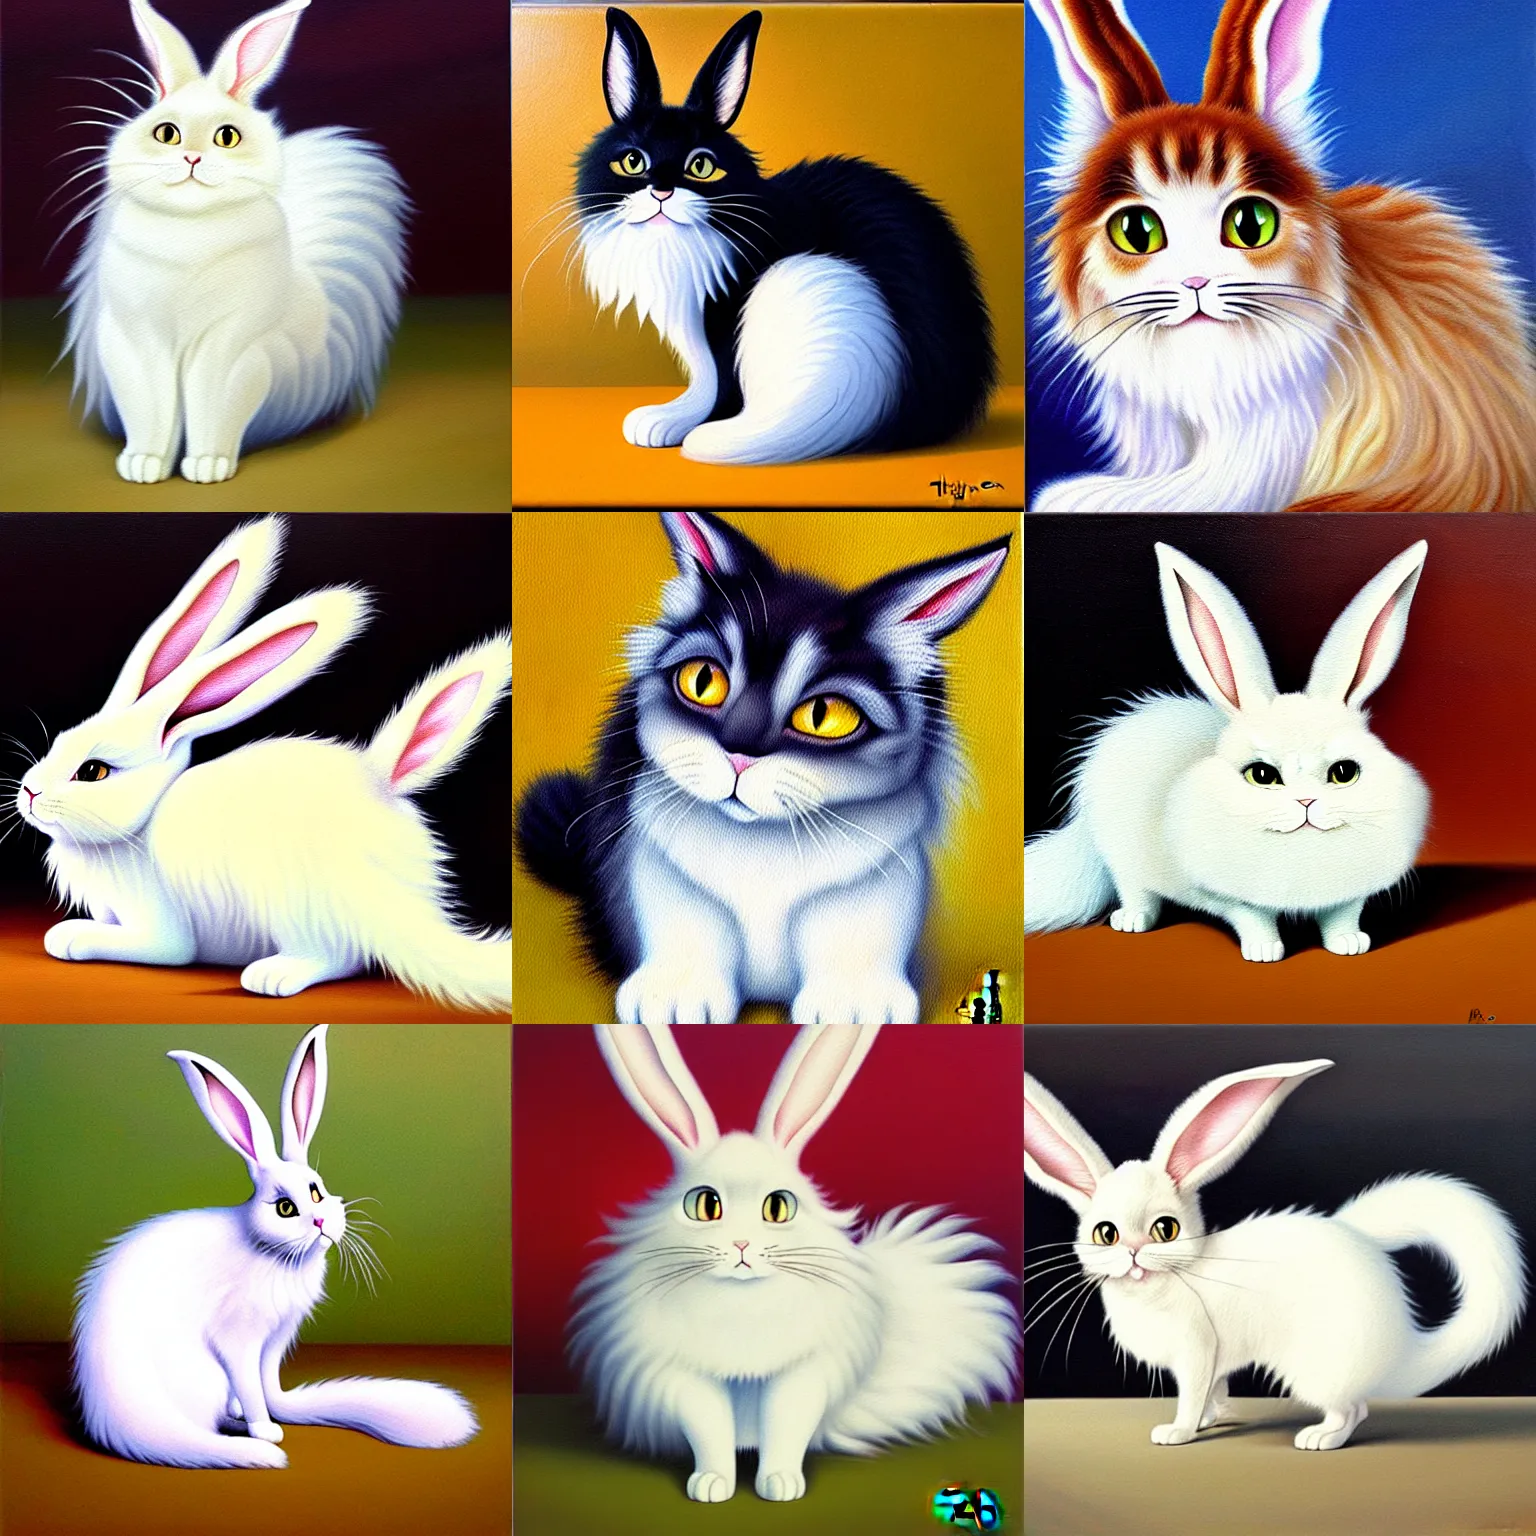 Prompt: oil painting of bunny-cat hybrid with long curly white fluffy fur and extra long tail, by Hayao Miyazaki